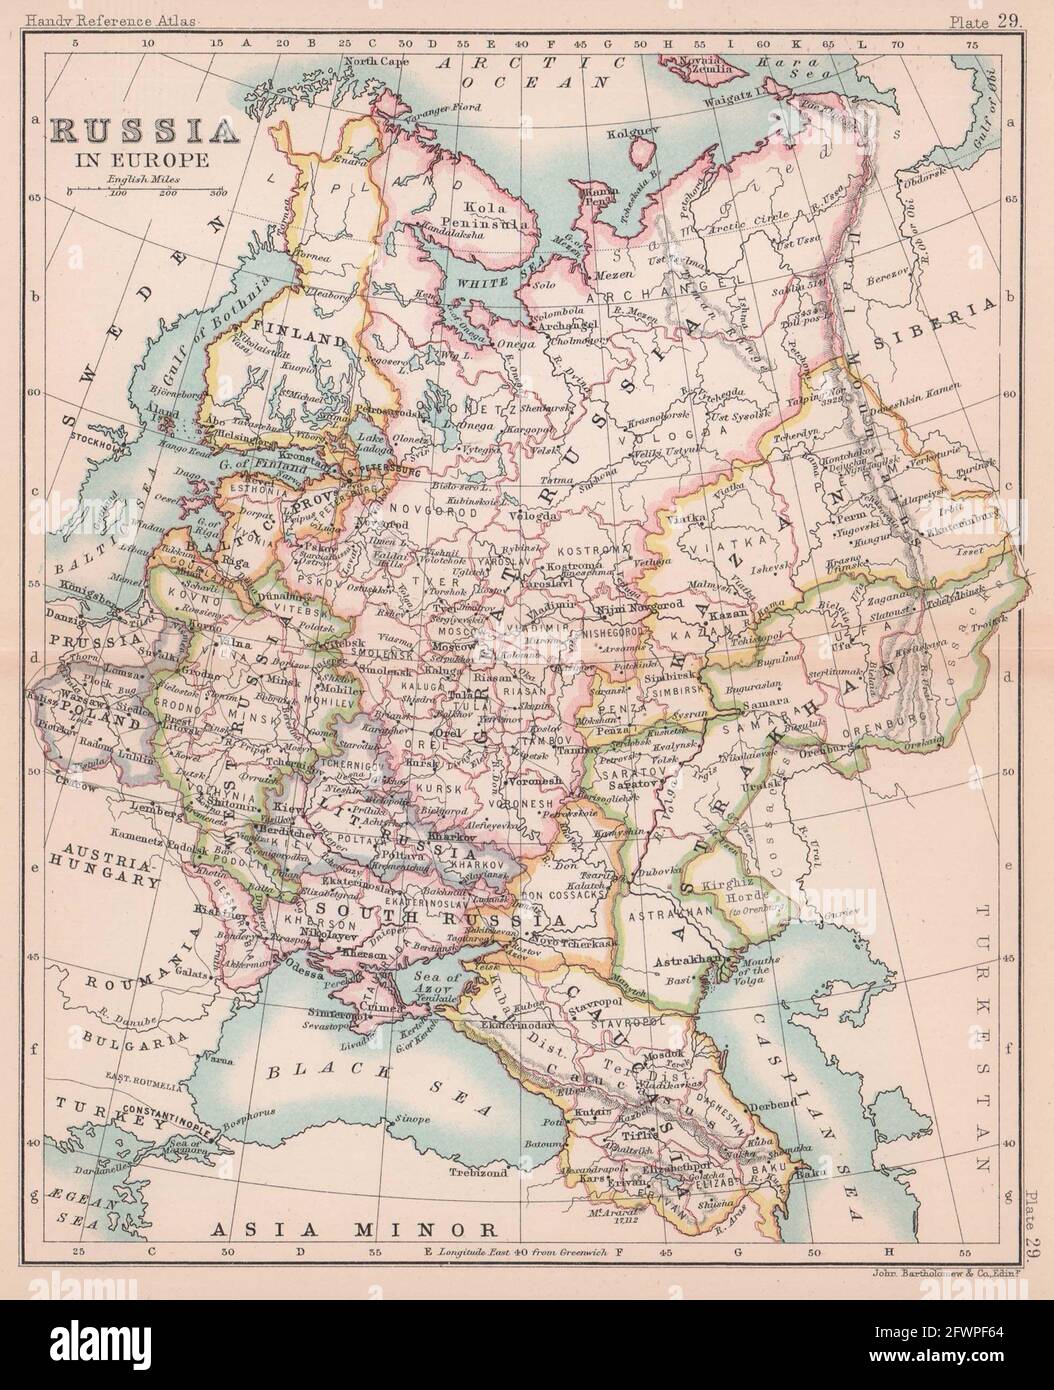 Russia in Europe. Poland. West/Little/Great/South Russia. BARTHOLOMEW 1893 map Stock Photo